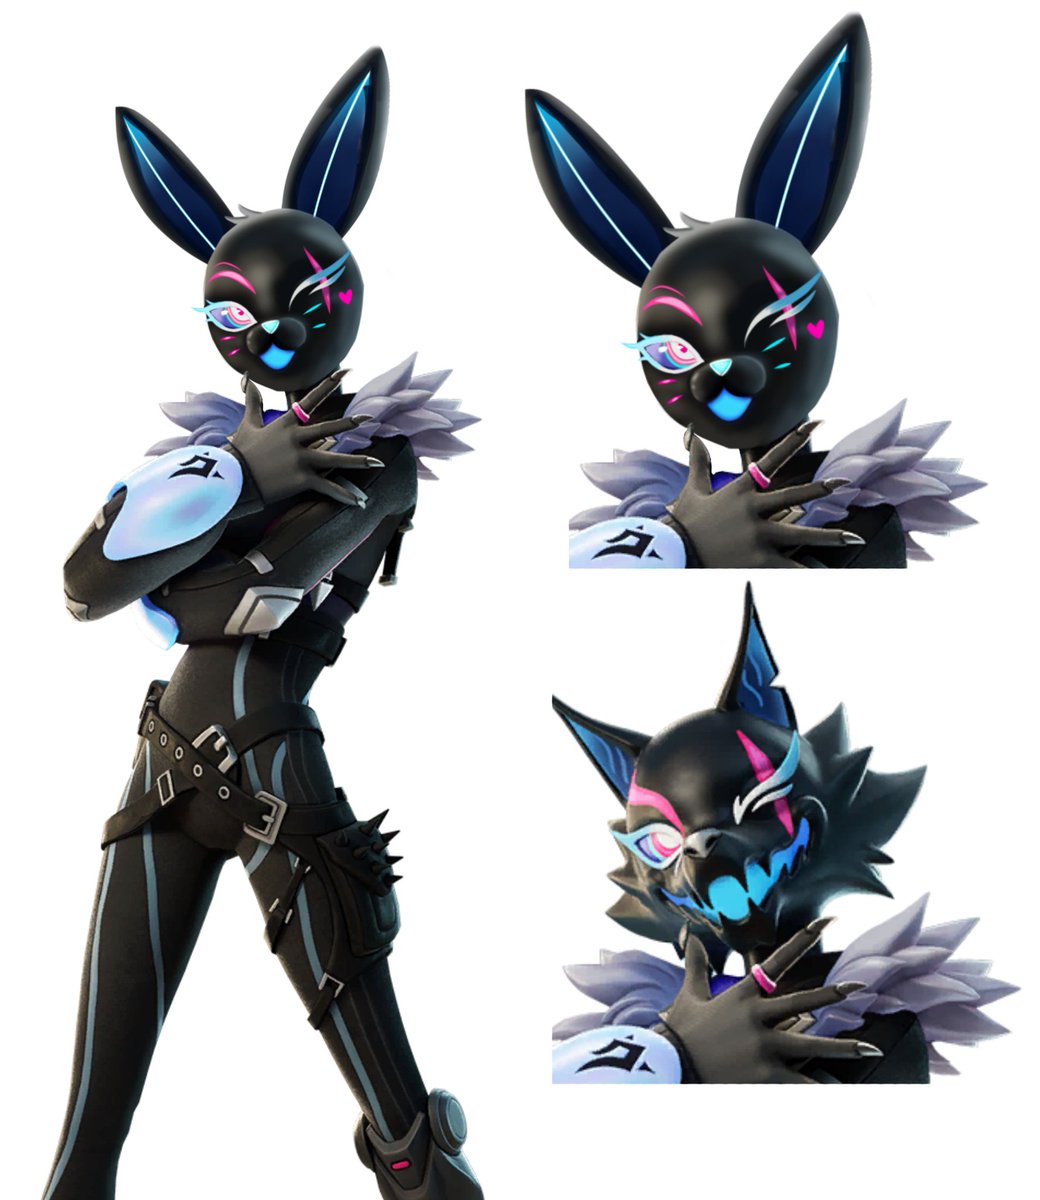 I edited Highwire wolf head into the Bunny head in my program, aaaand... I think it looks so cute!
What do you think about it?💜 #Fortnite #FortniteArt #FortniteChapter4Season2